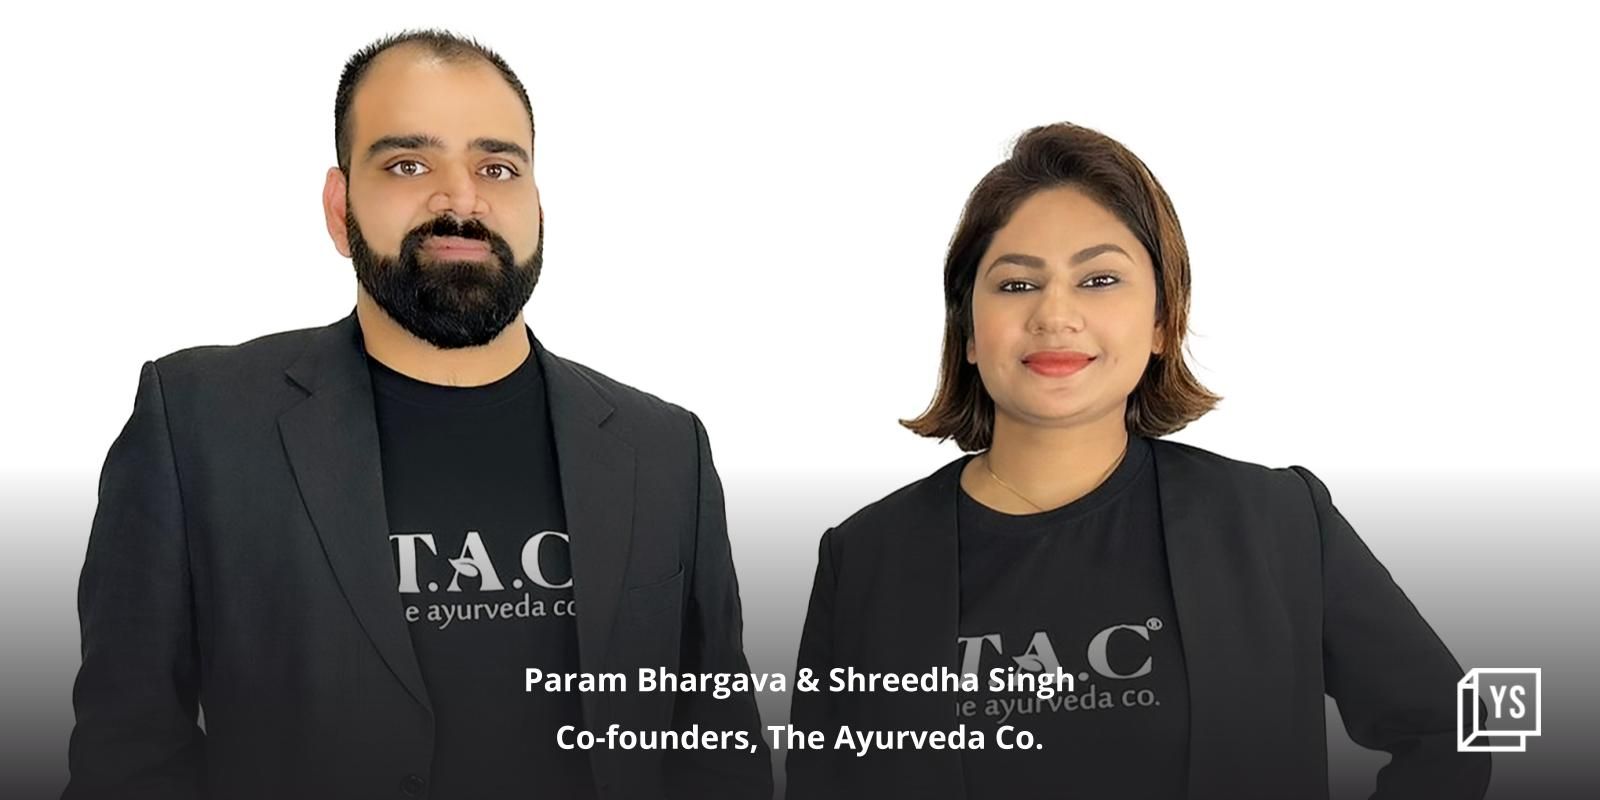 The Ayurveda Co raises $12.2M in Series A round led by Sixth Sense Ventures